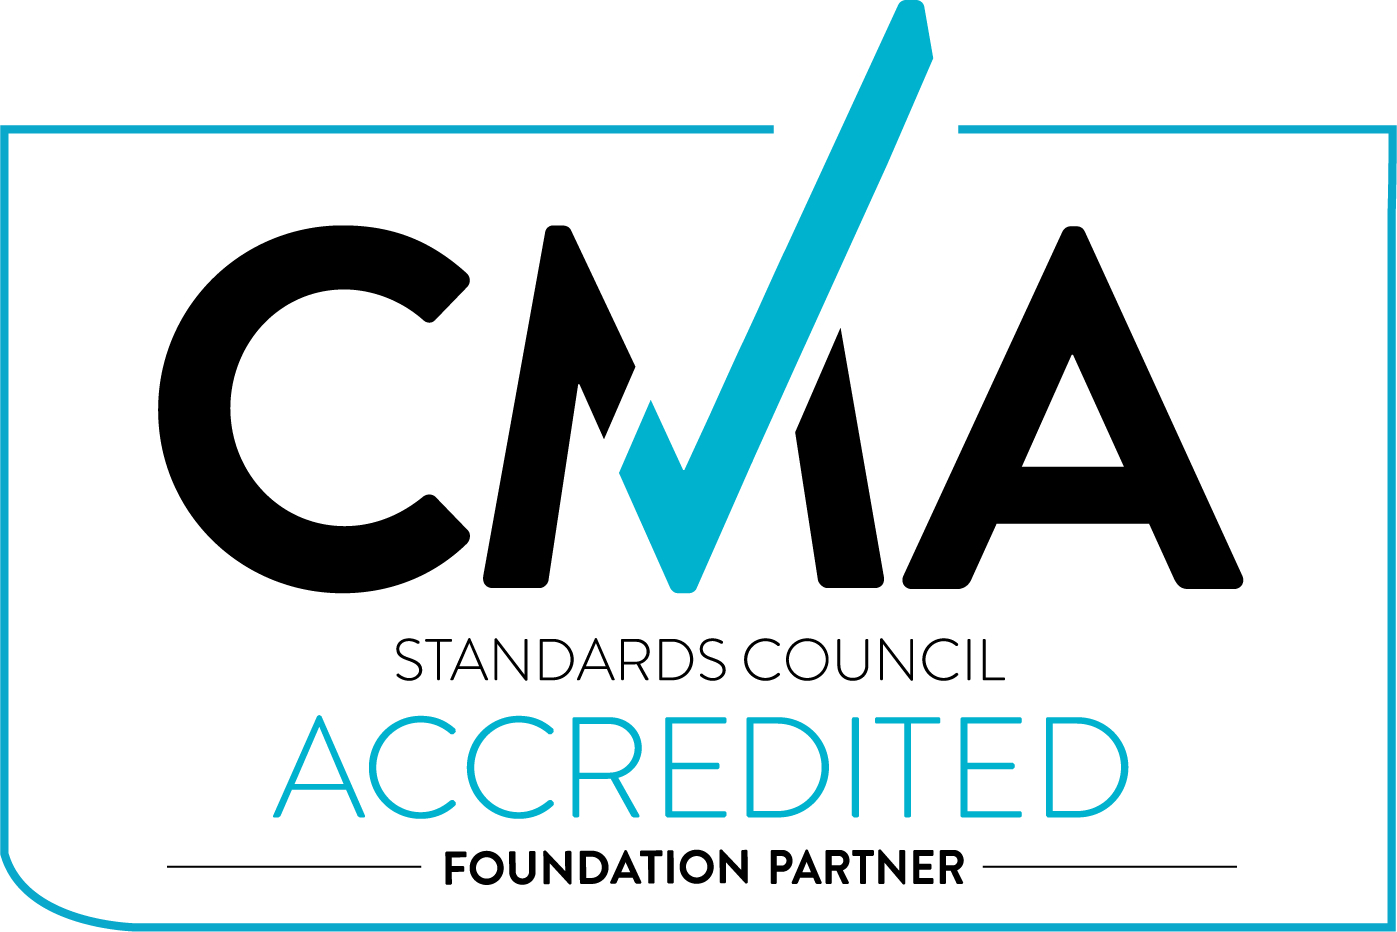 CMA Standards Council Accredited